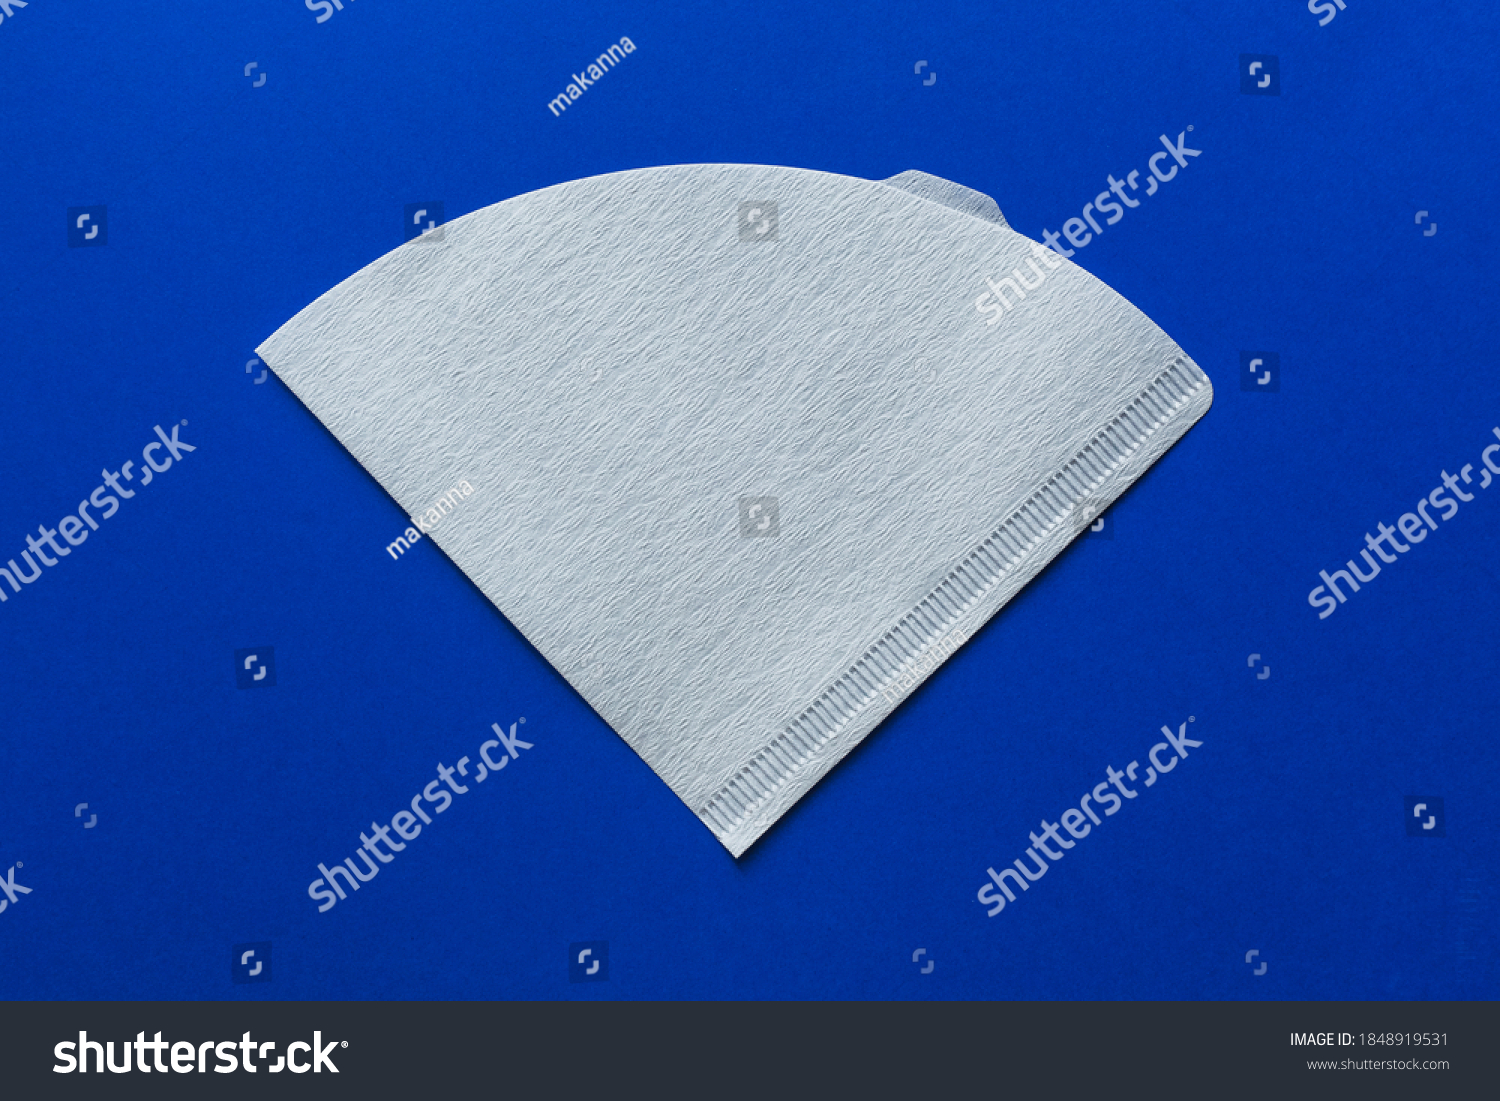 Bleached paper coffee filter isolated on a colored blue background. Alternative brewing pour over coffee. Minimalistic abstract background #1848919531